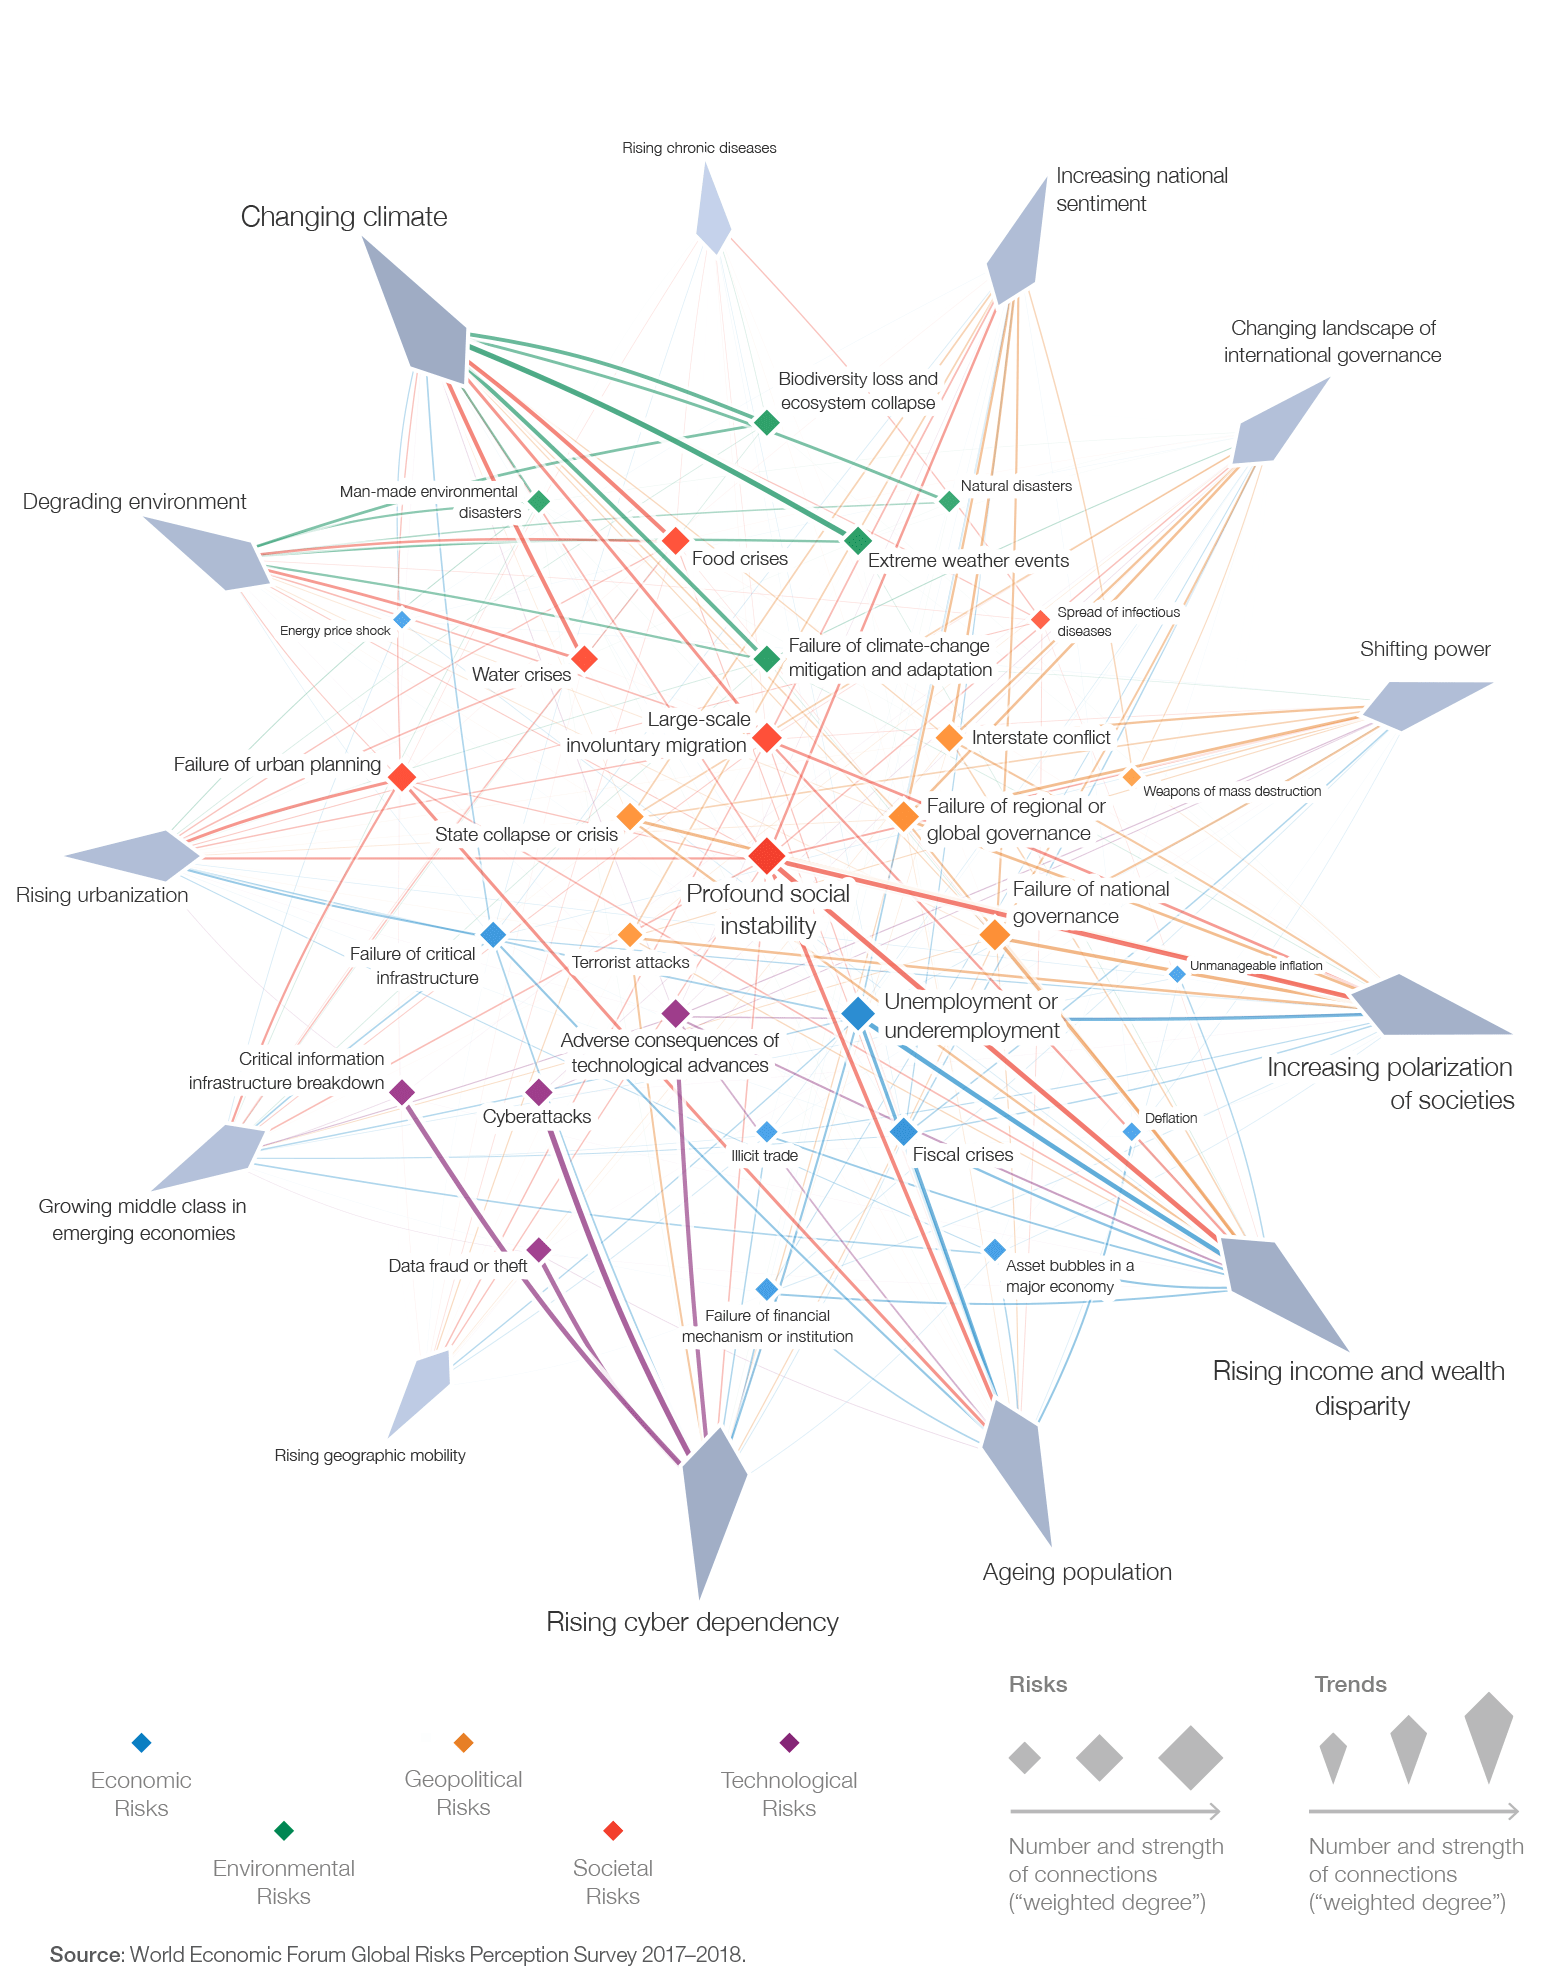 Risks-Trends Interconnections Map 2018